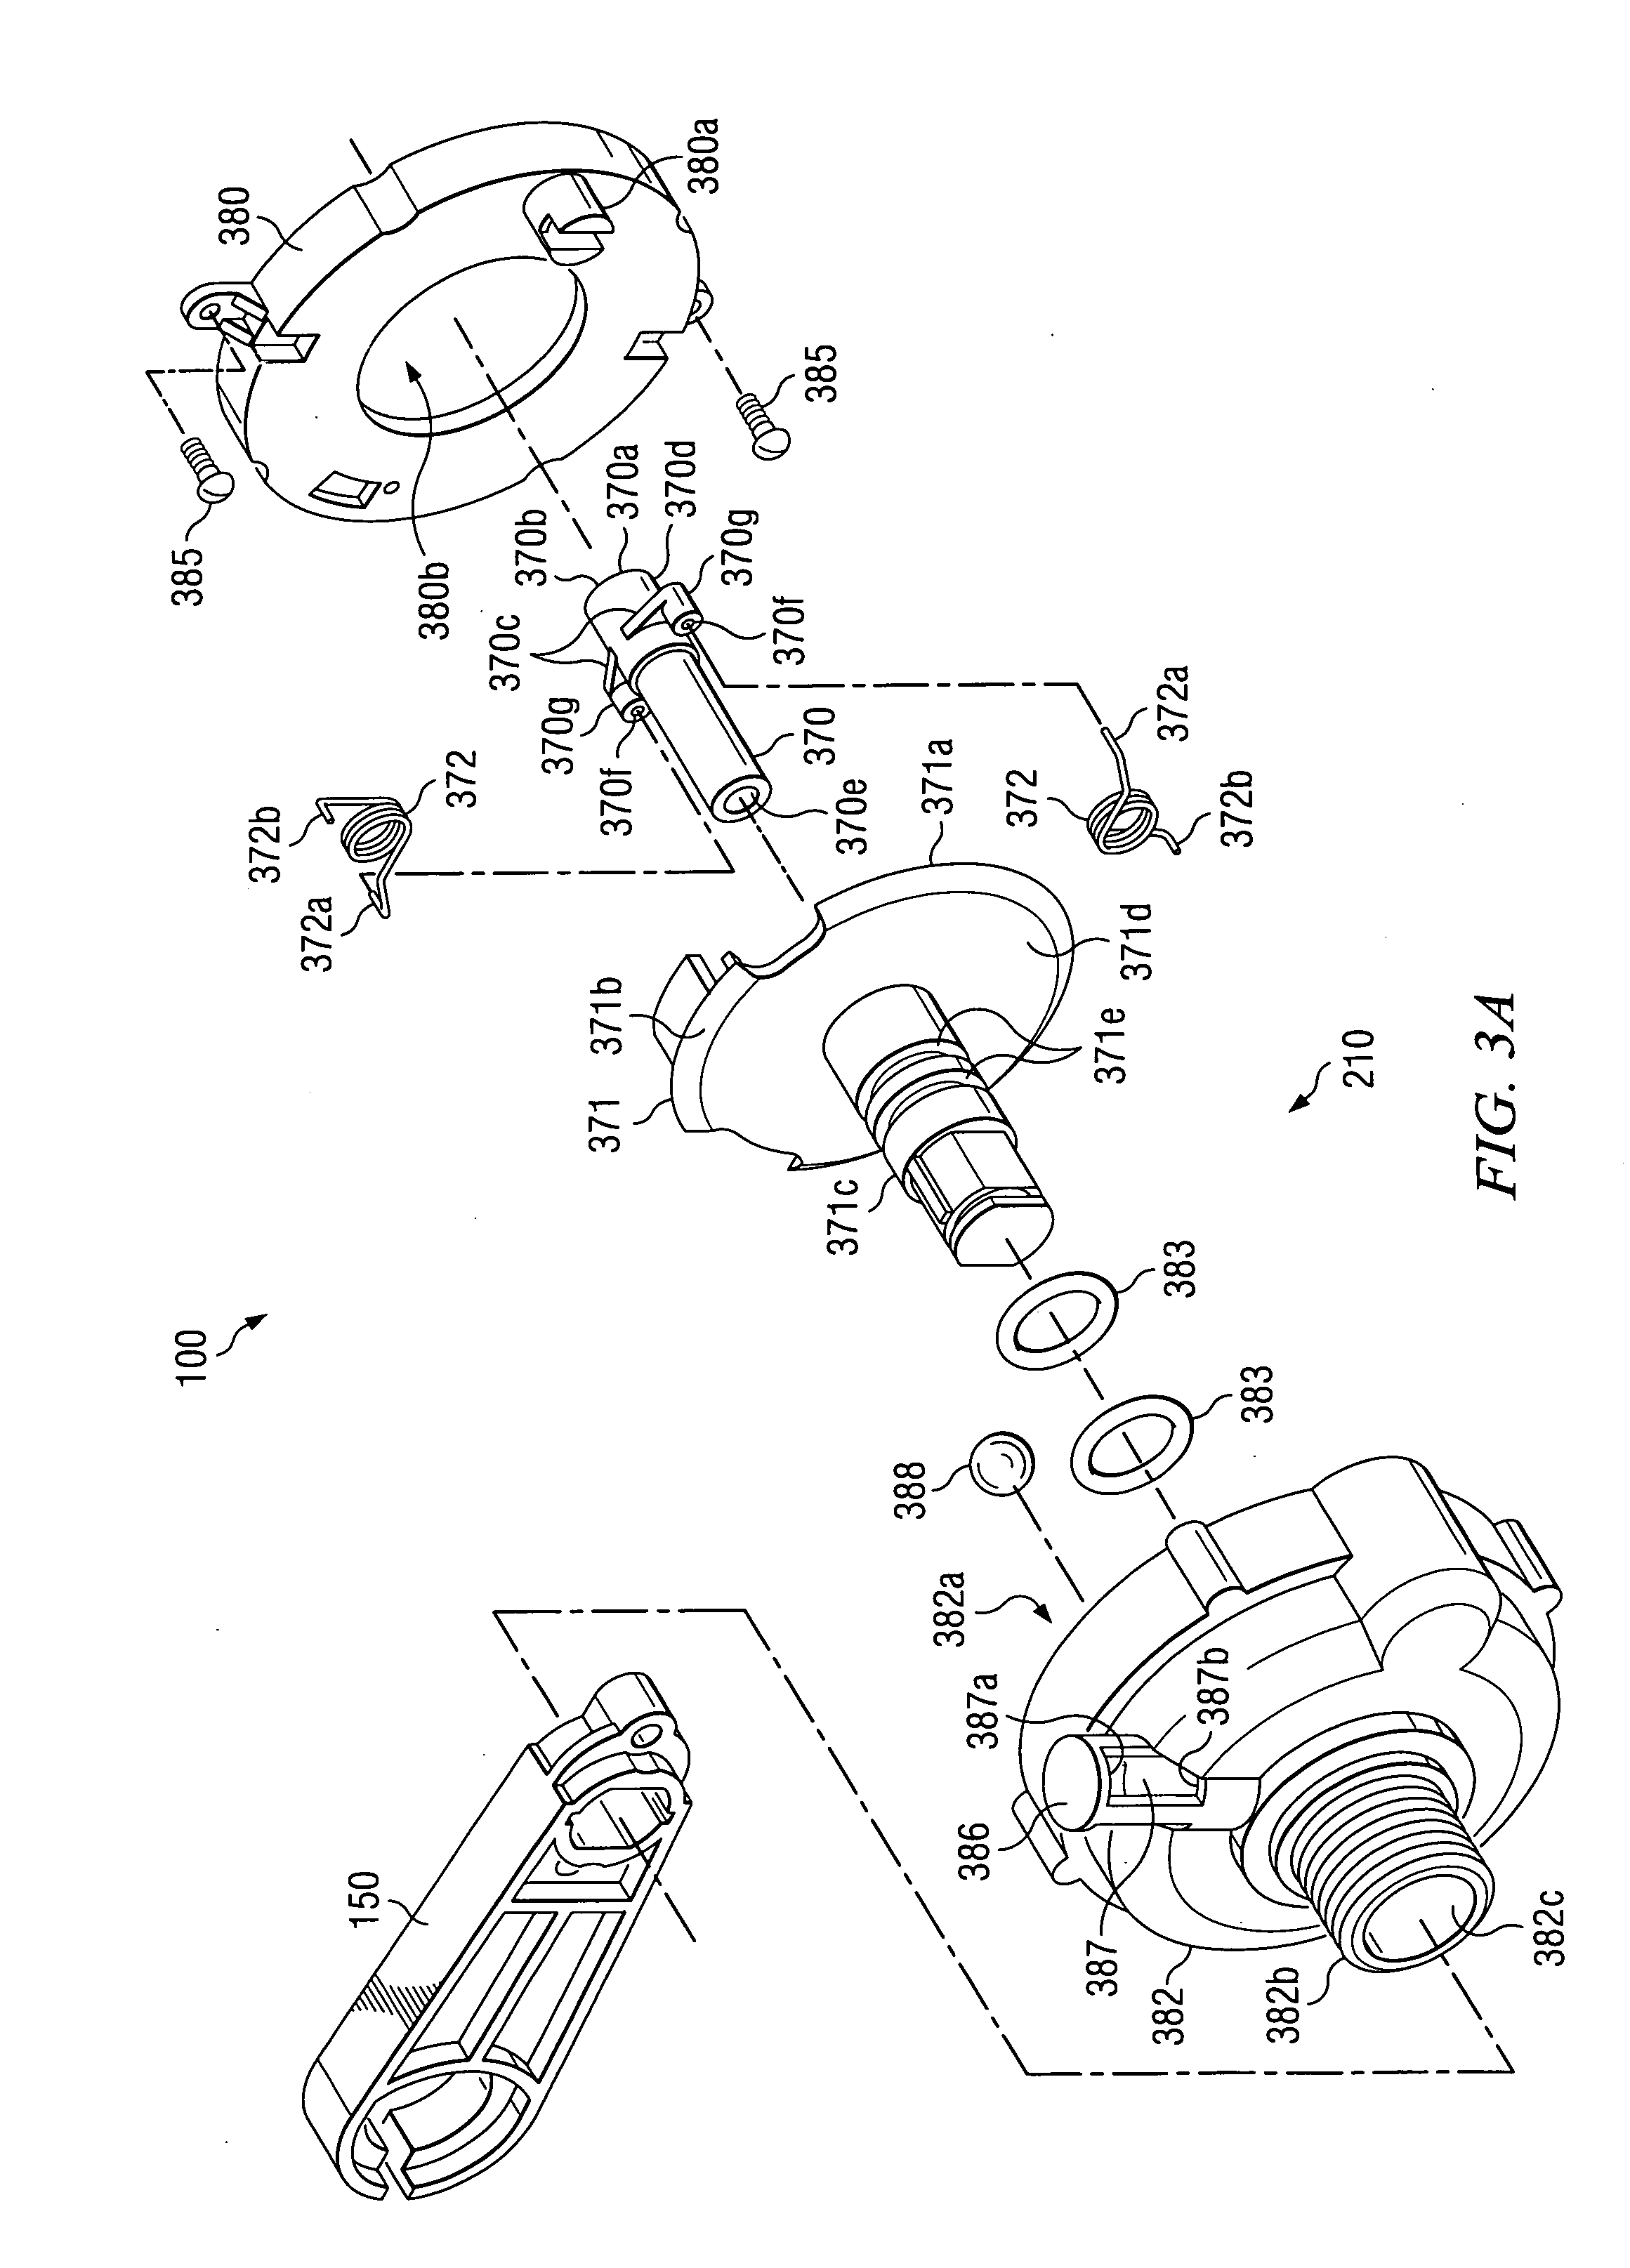 Low Oil Trip Assembly for a Fault Interrupter and Load Break Switch